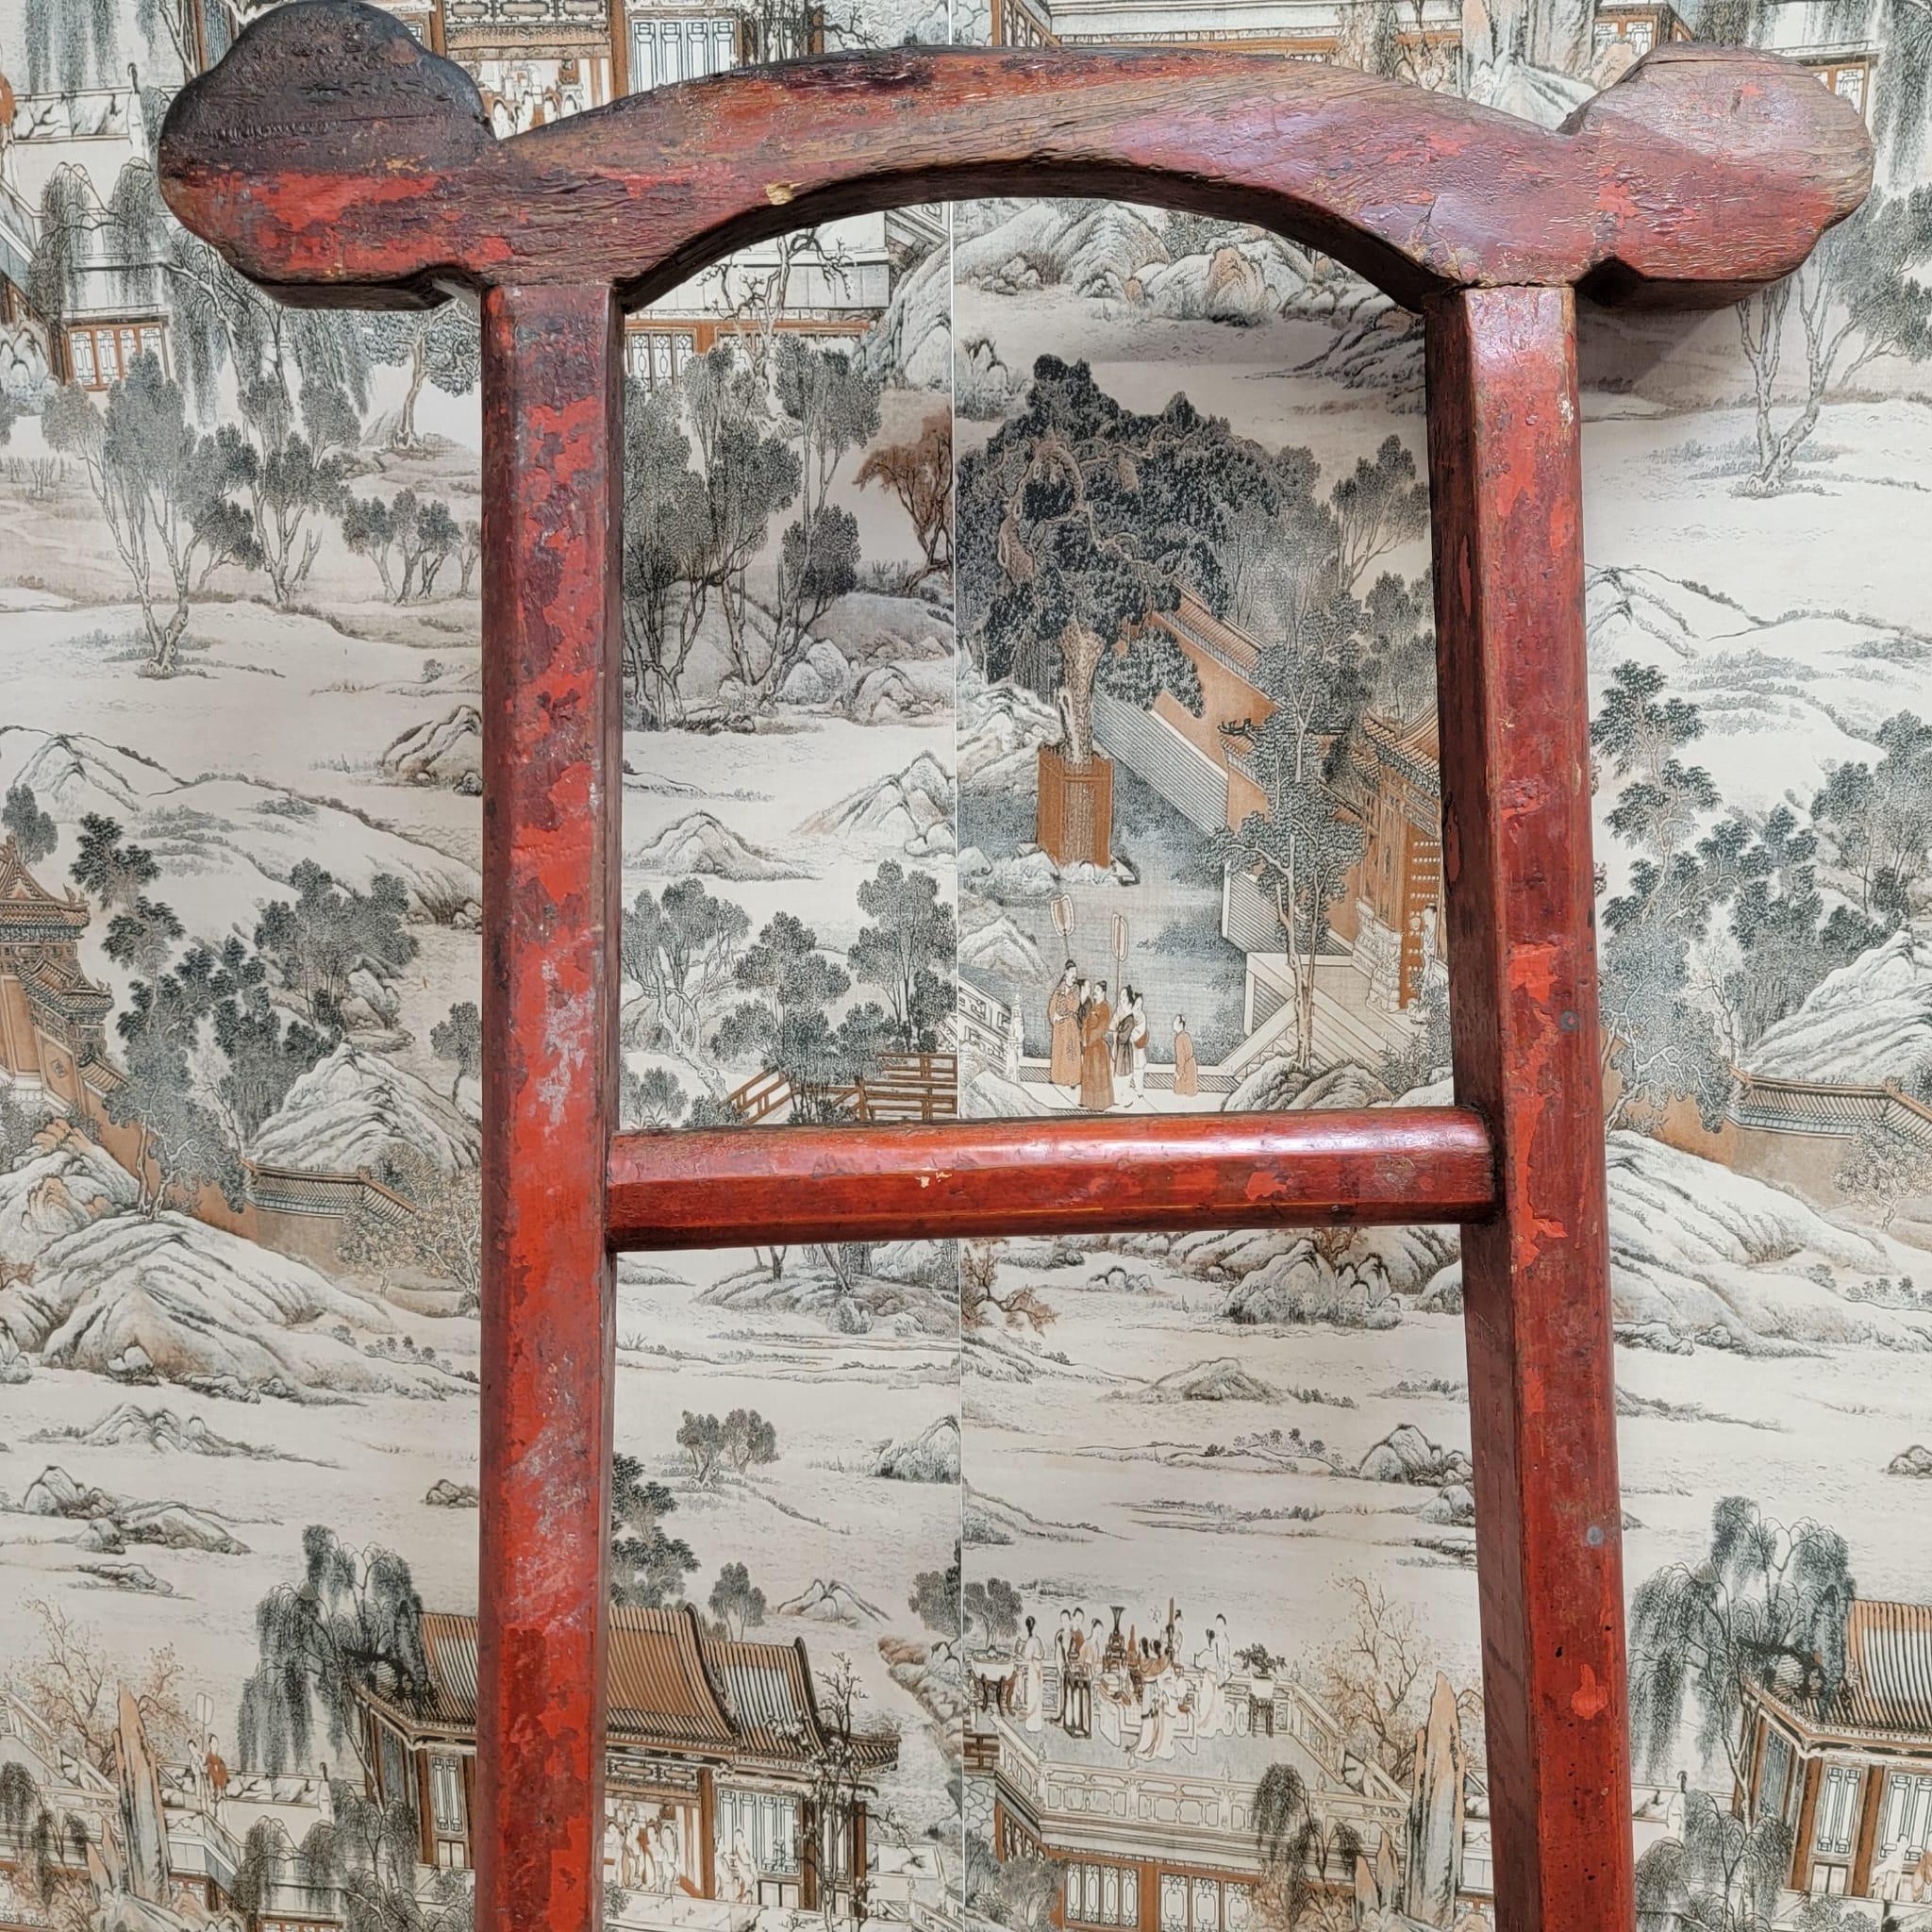 Vintage Chinese Red Lacquer Elm Decorative Ladder

This vintage elm decorative ladder is from the south of China. With original color and patina. Used as a display for kitchen towels or bathroom towels. Practical elegance. 

Circa: